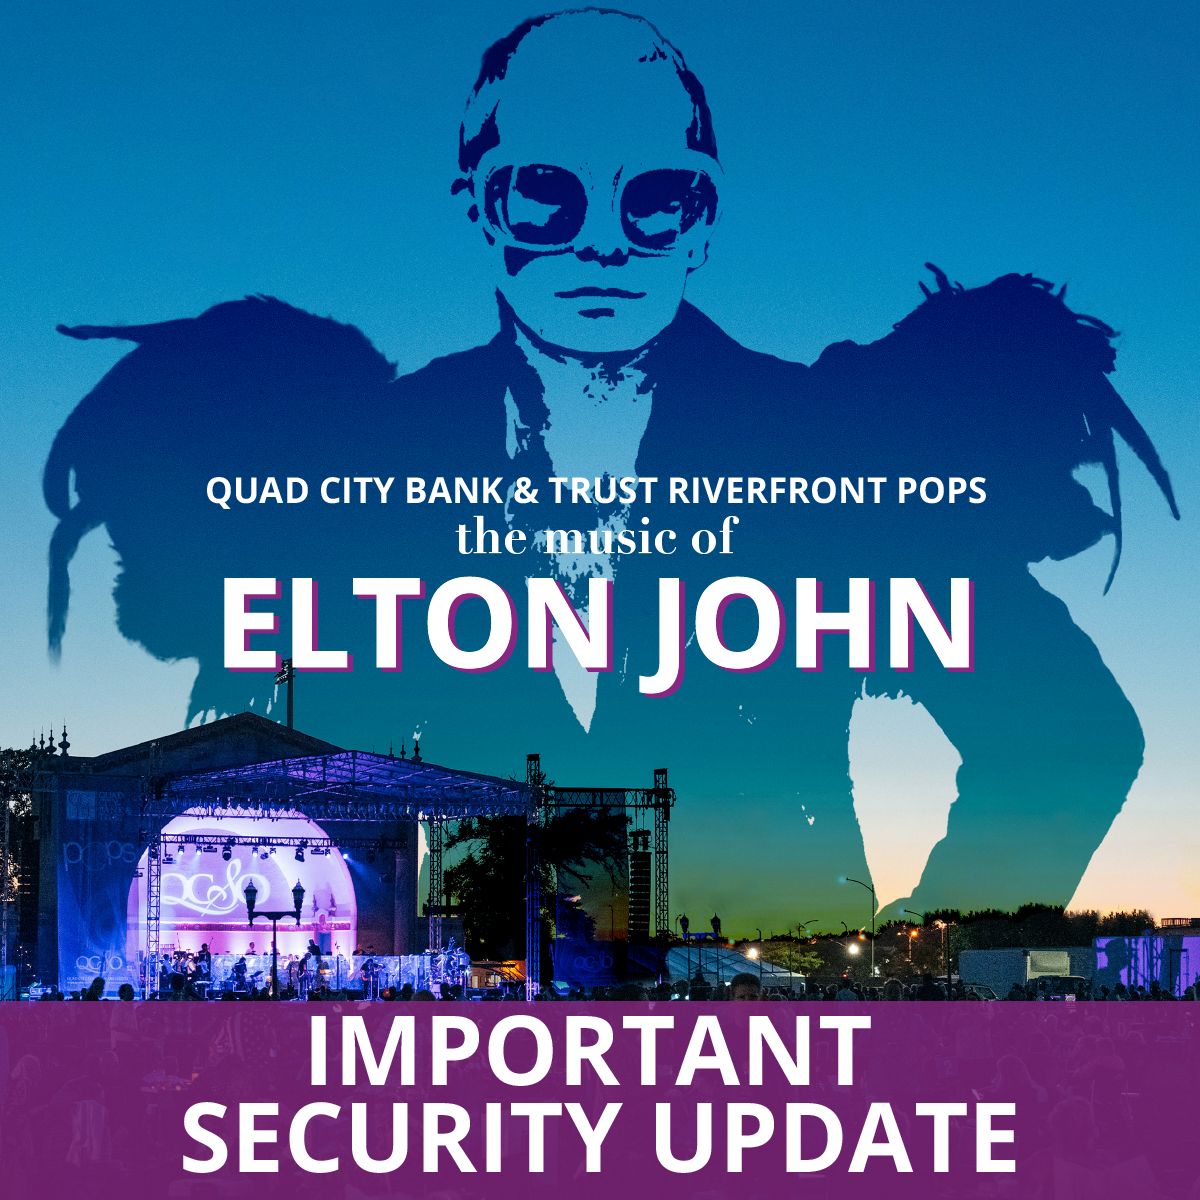 Updated Security Screening for QCBT Riverfront Pops